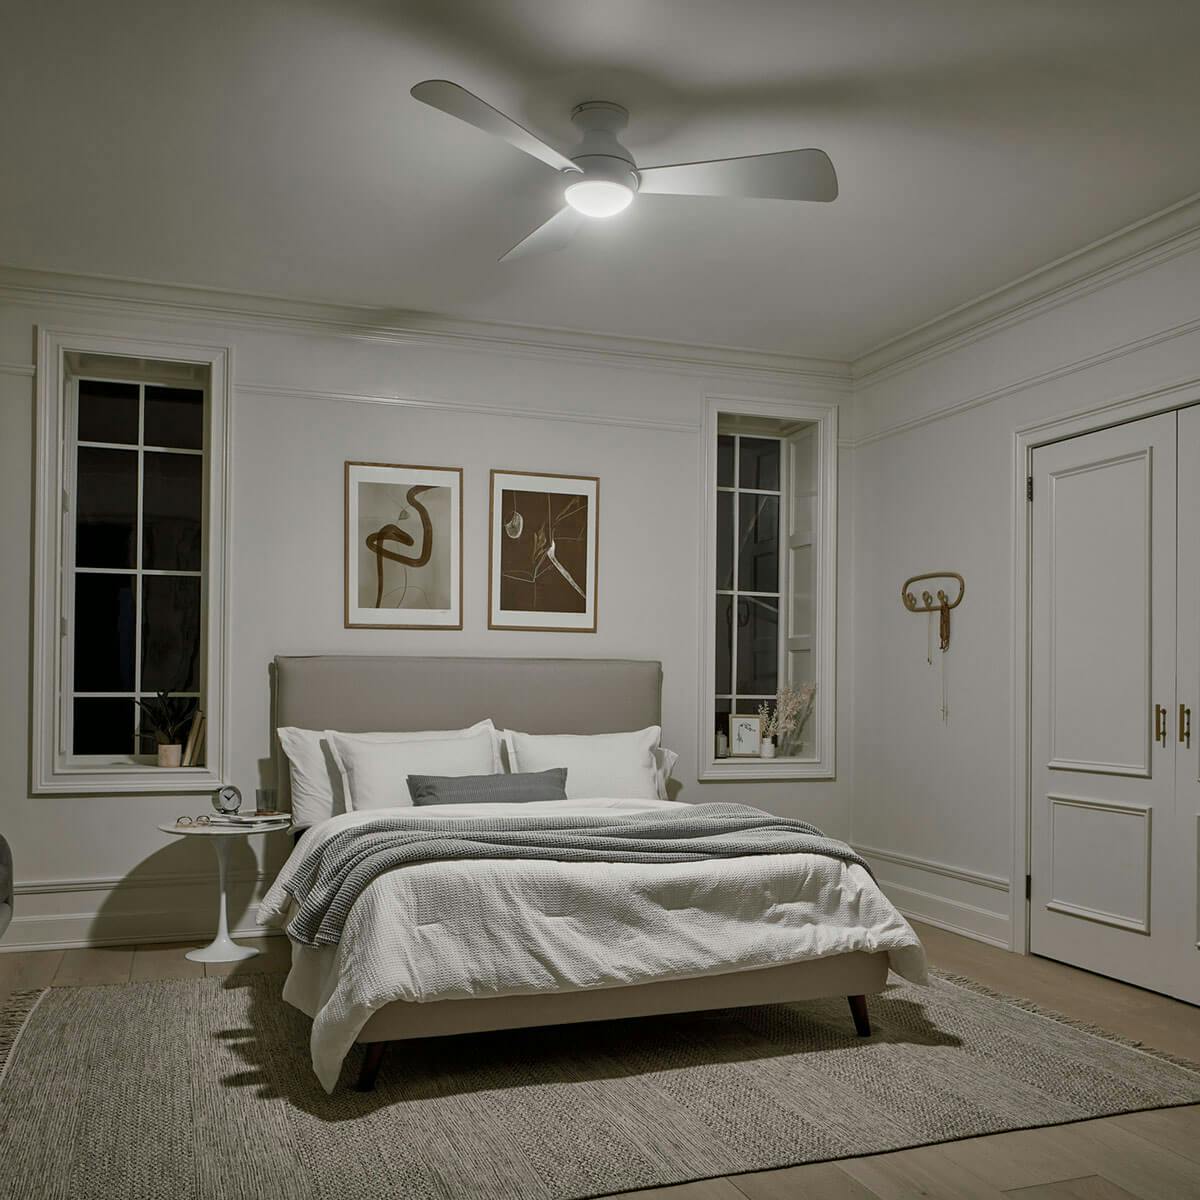 Night timebedroom image featuring Sola 330152MWH